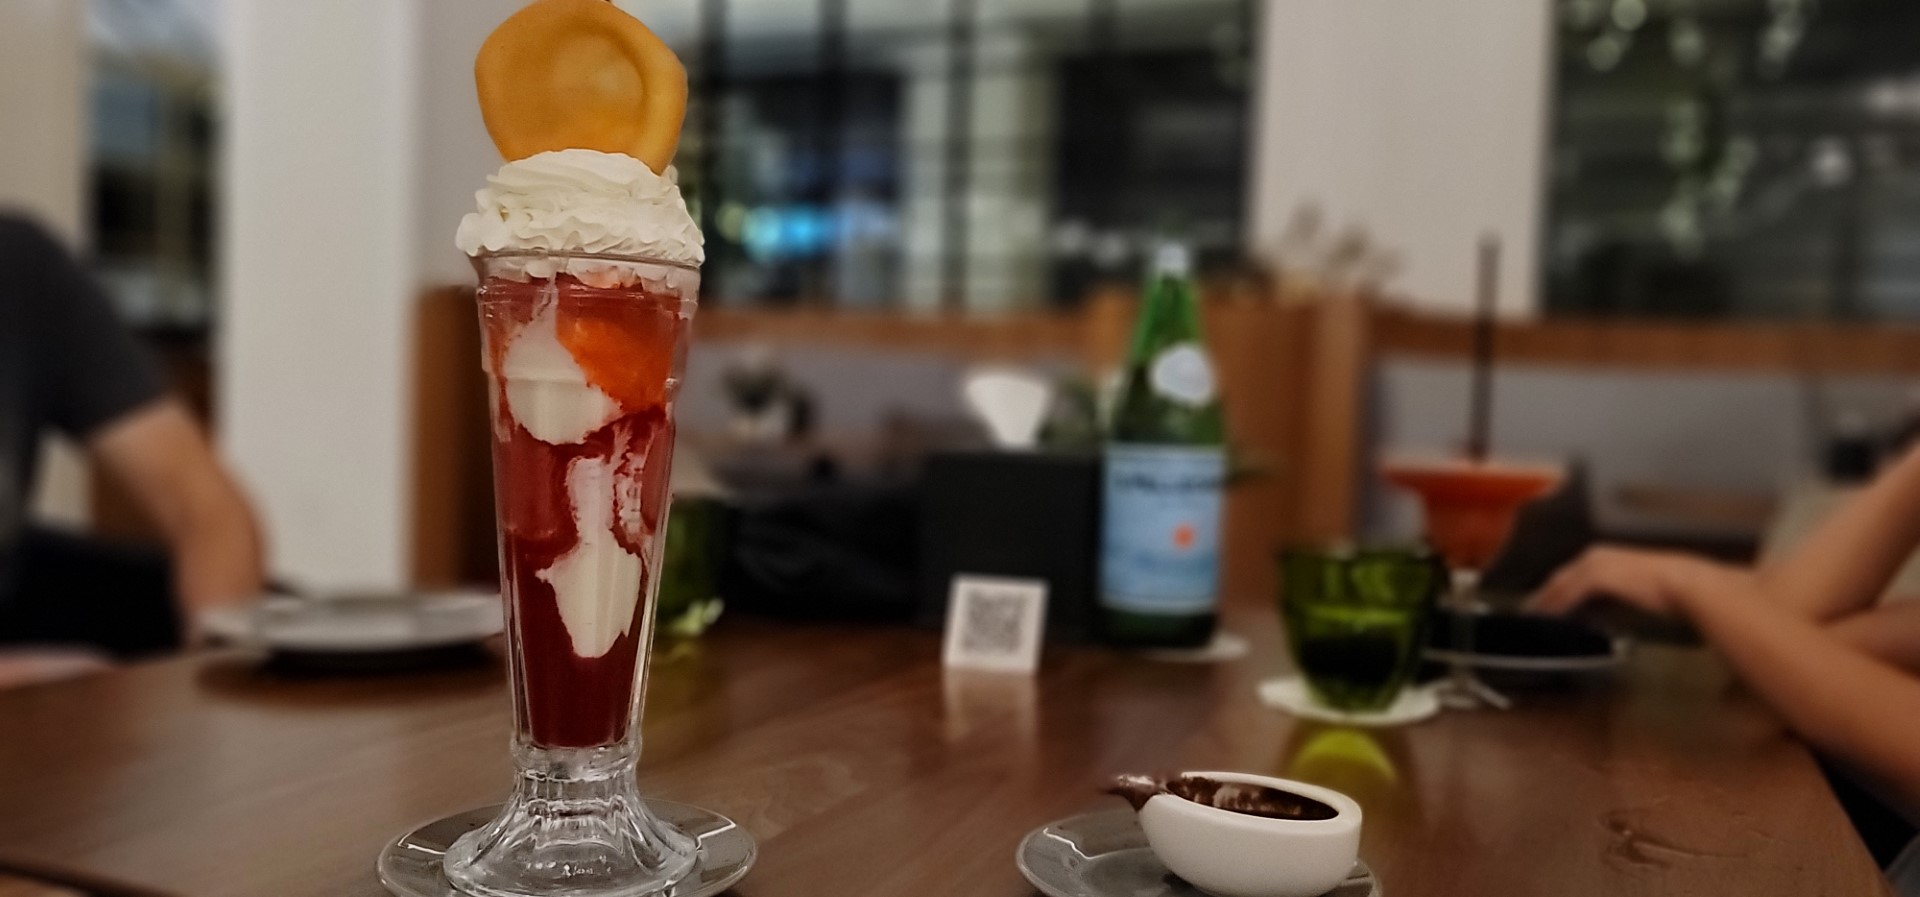 Eaton Mess in a glass